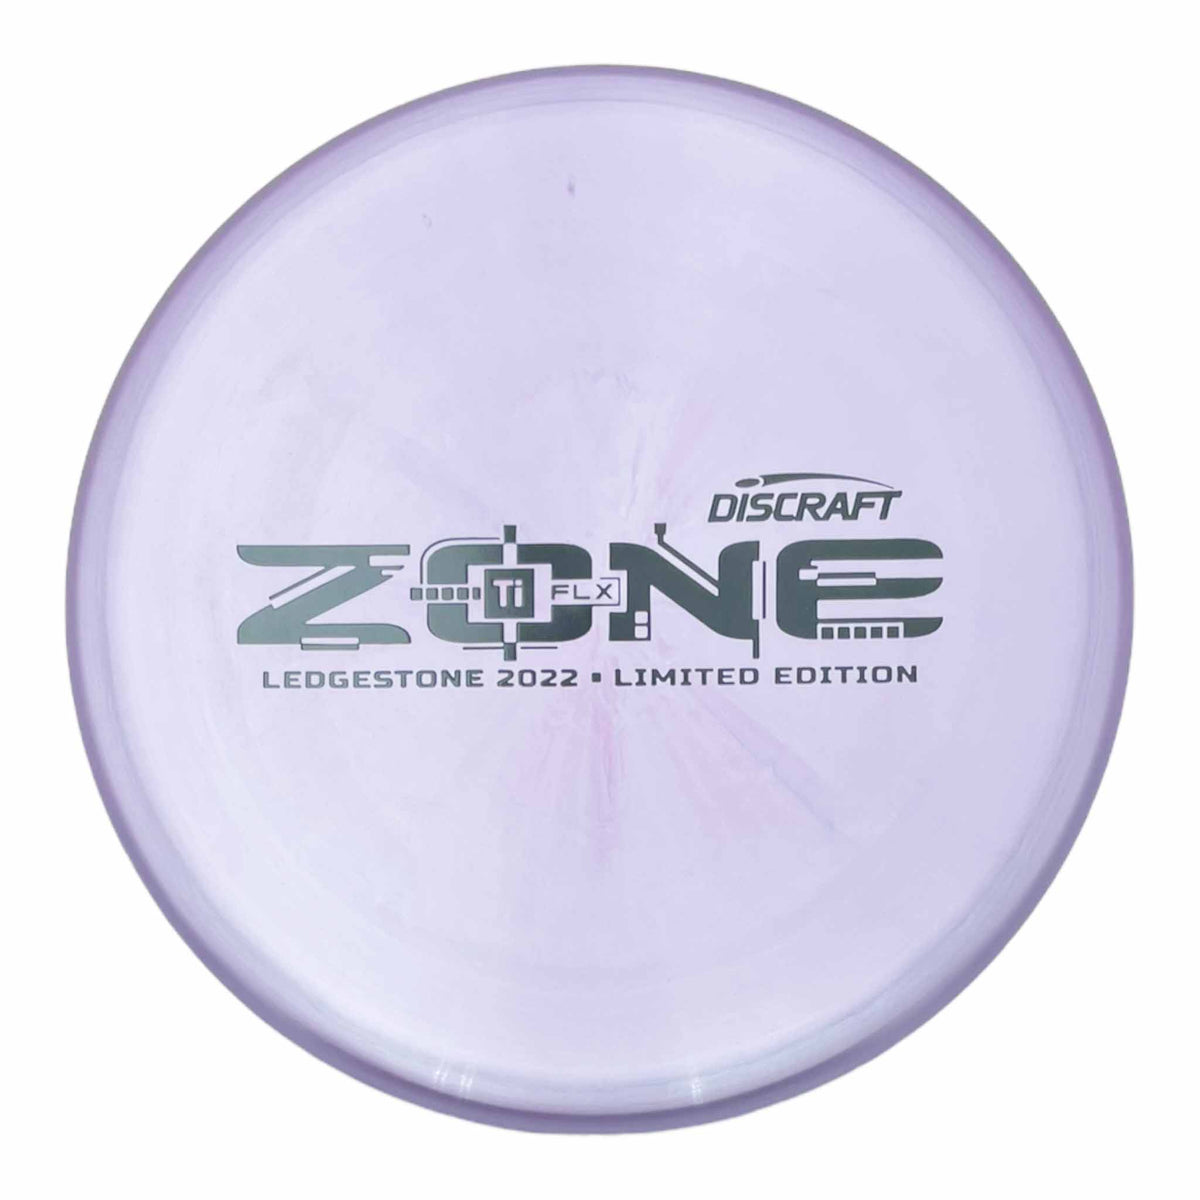 Discraft 2022 Ledgestione Limited Edition Ti FLX Zone putter and approach - Purple / Black